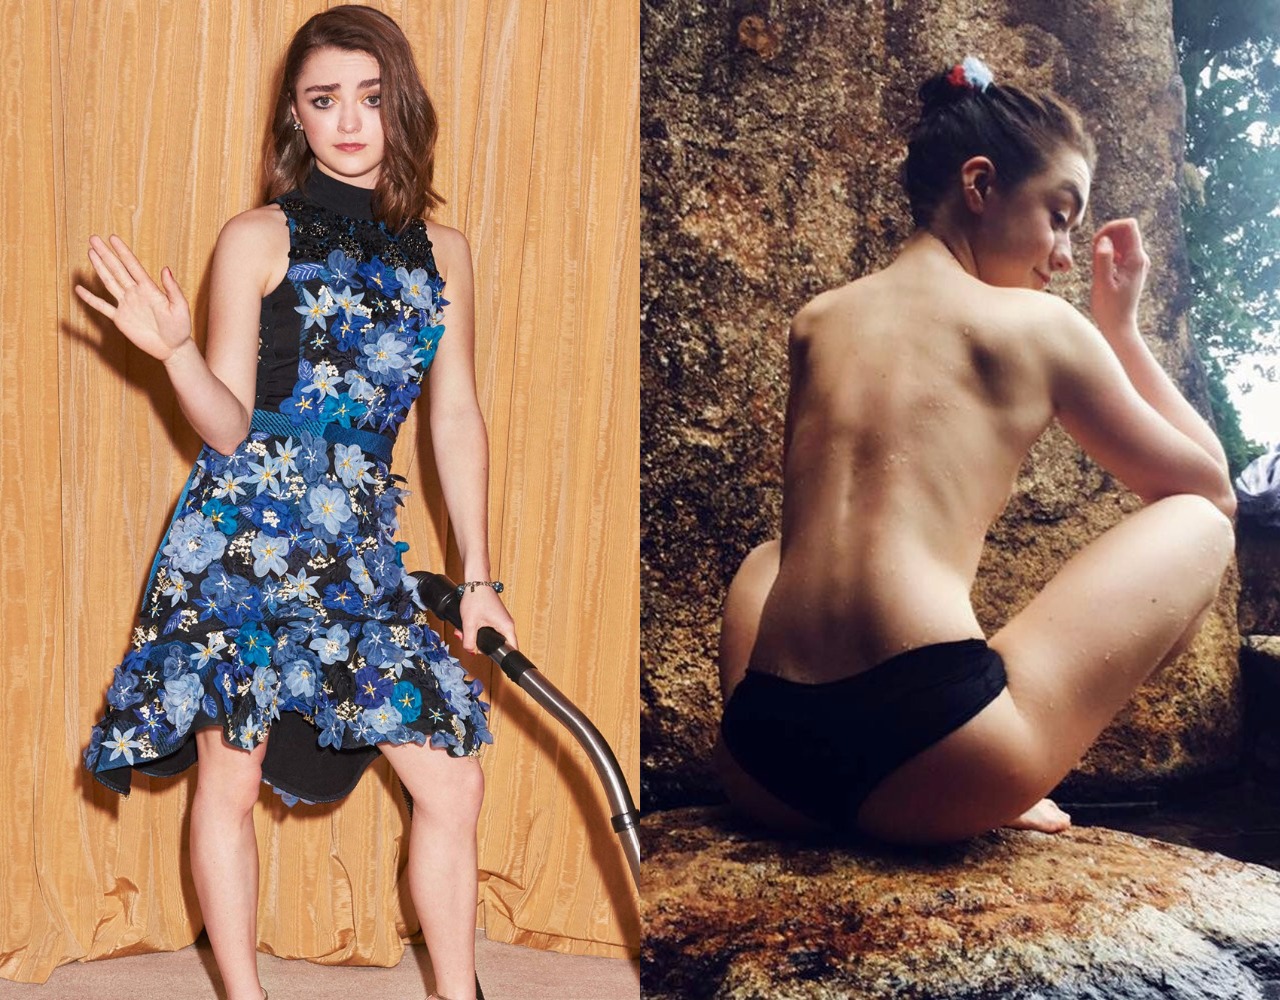 Maisie williams porn in Wuhan